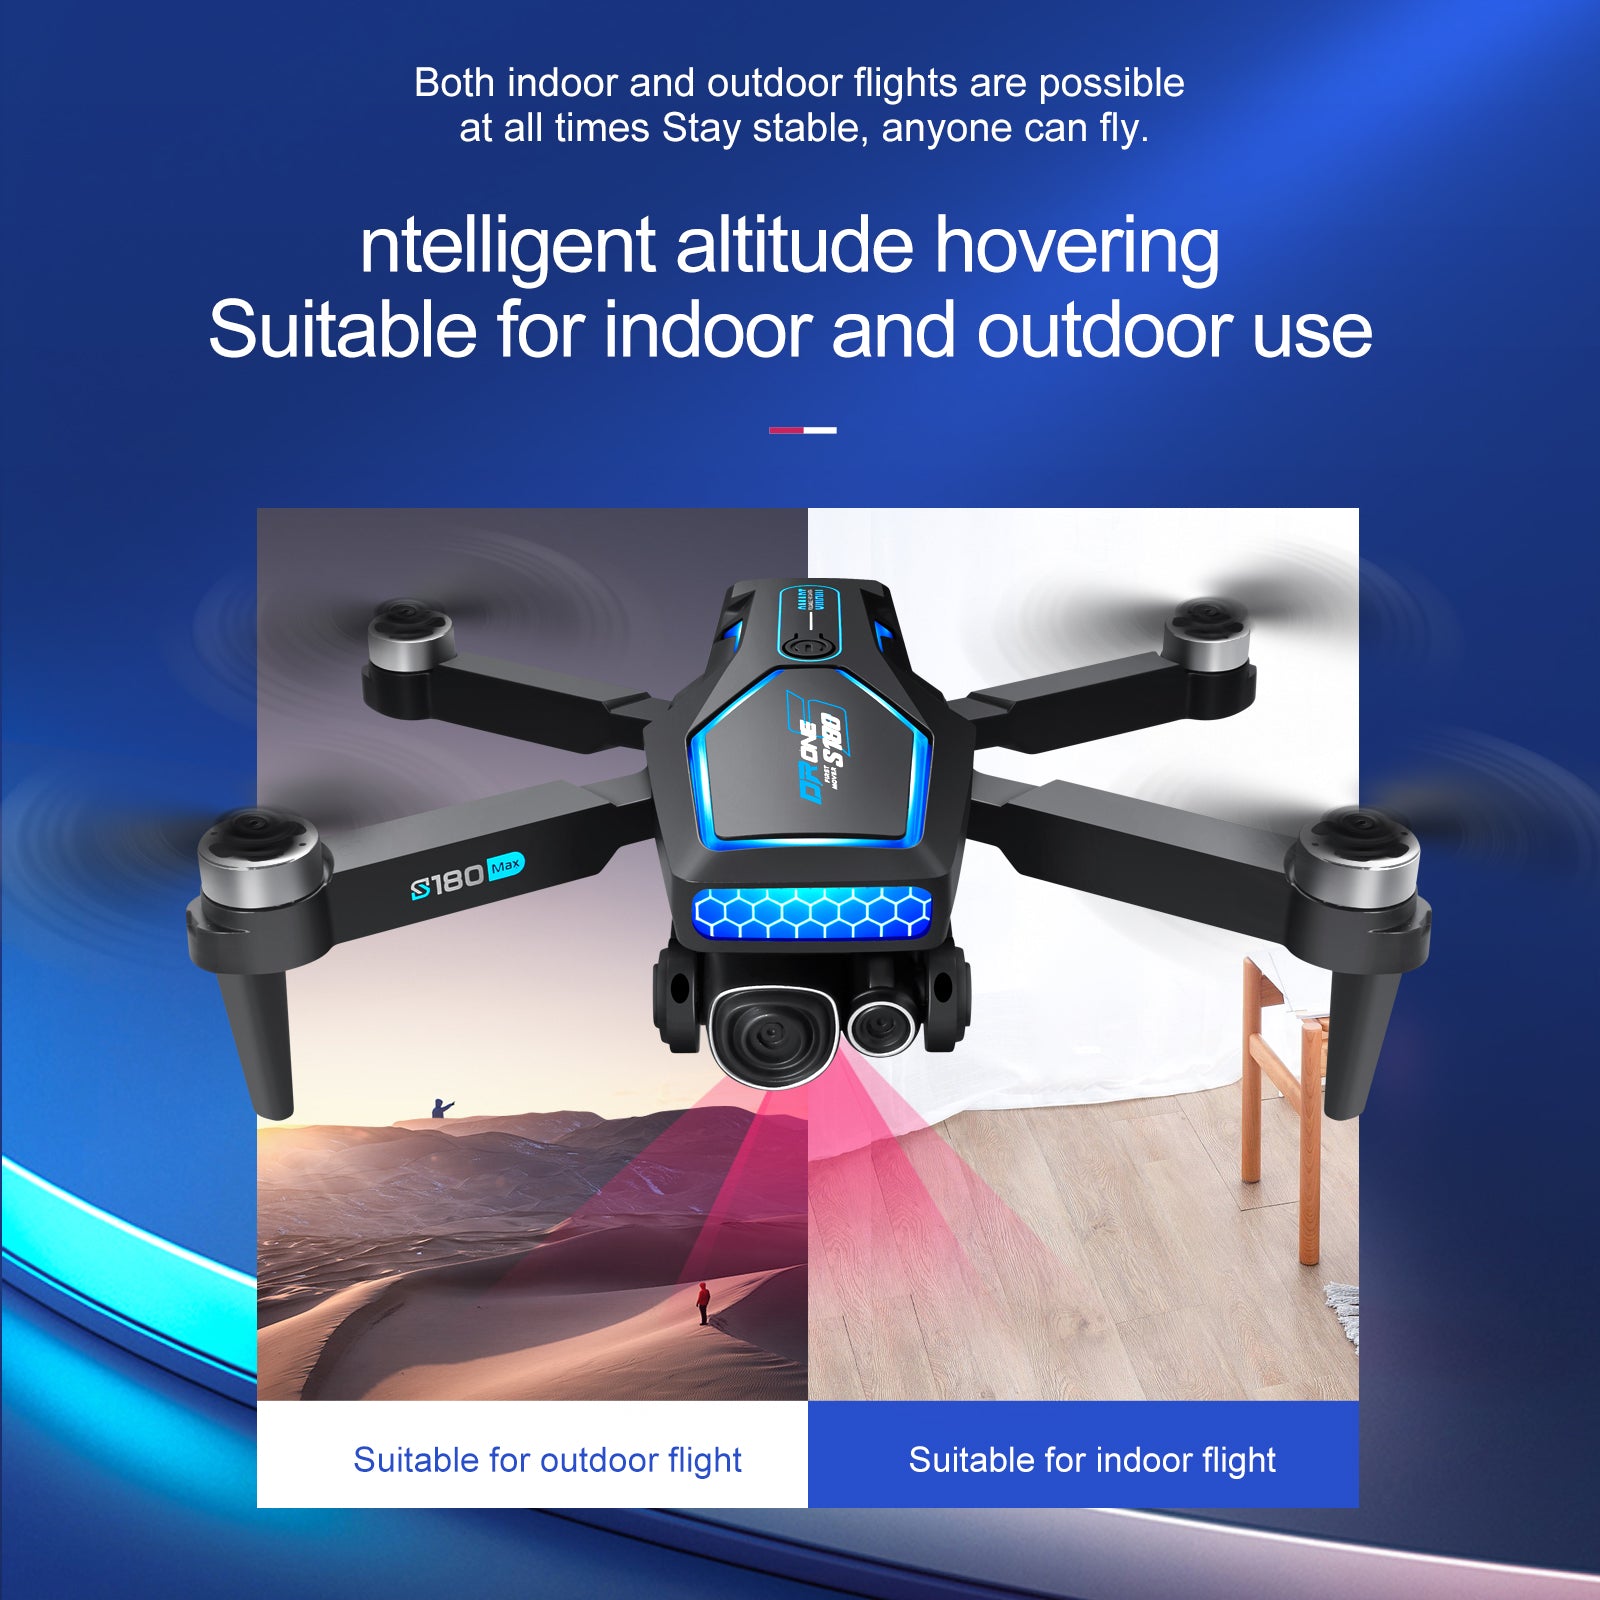 S180 Drone, Confident flying drone for indoor/outdoor use, stable and easy to control.